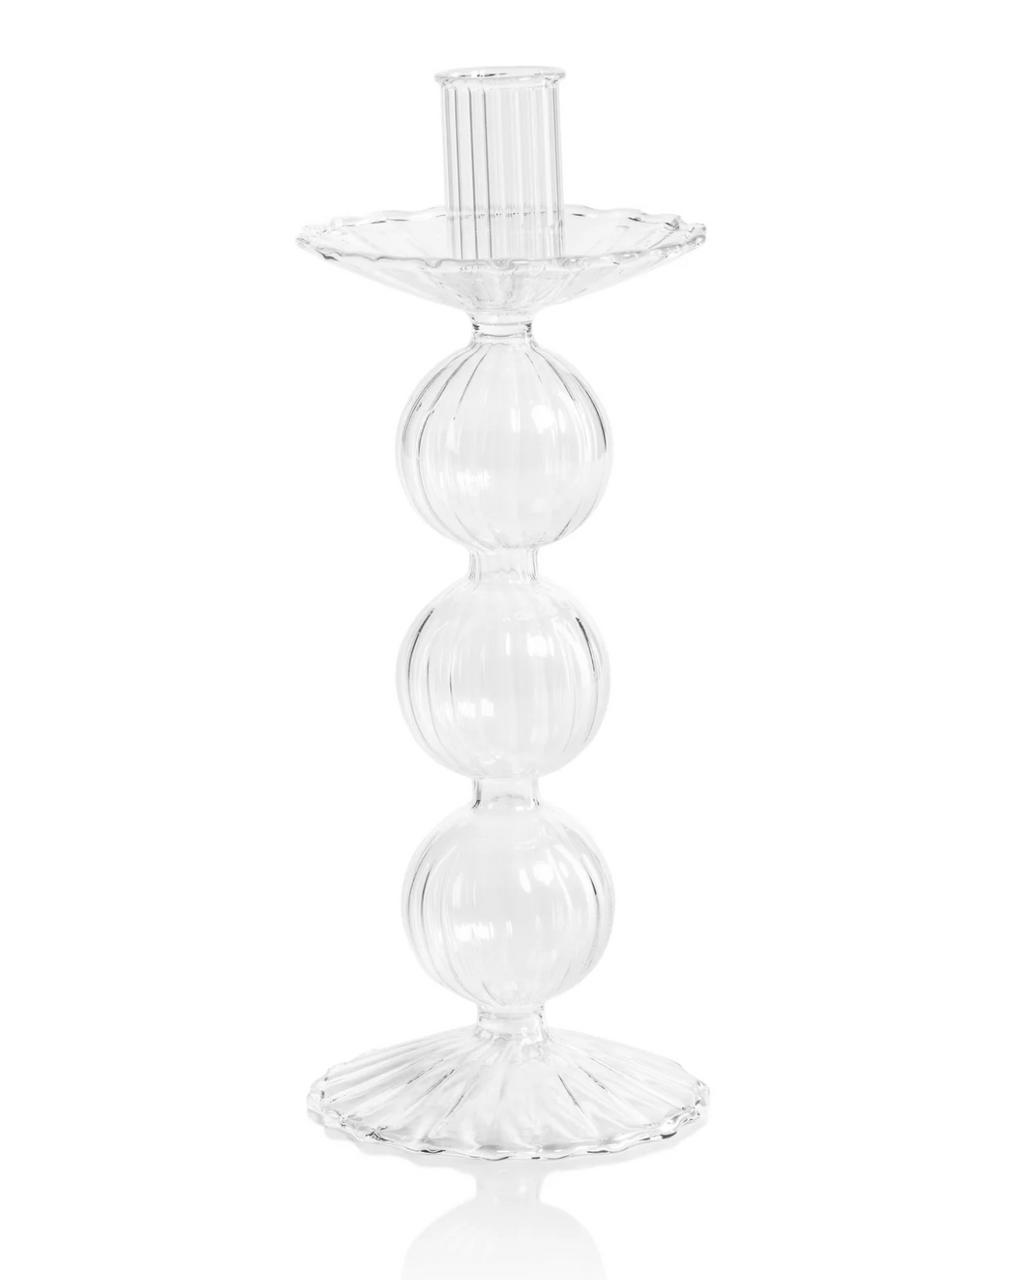 Holt-McCarty Luisa Glass Taper Candle Holder